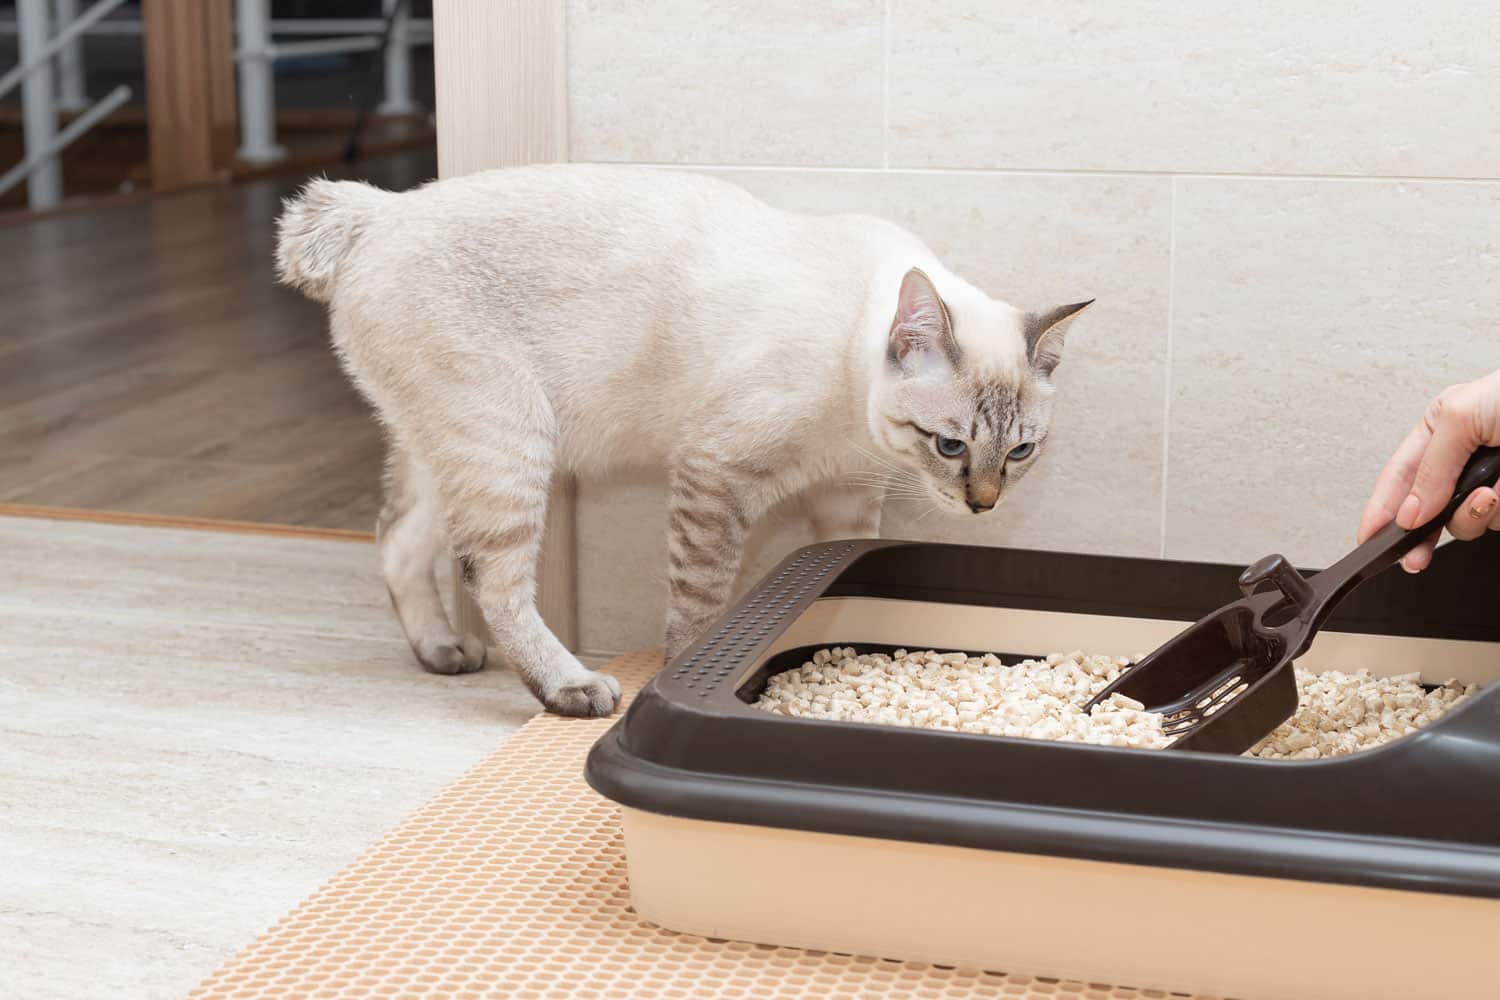 Cat watching human scoop out poo from litter box